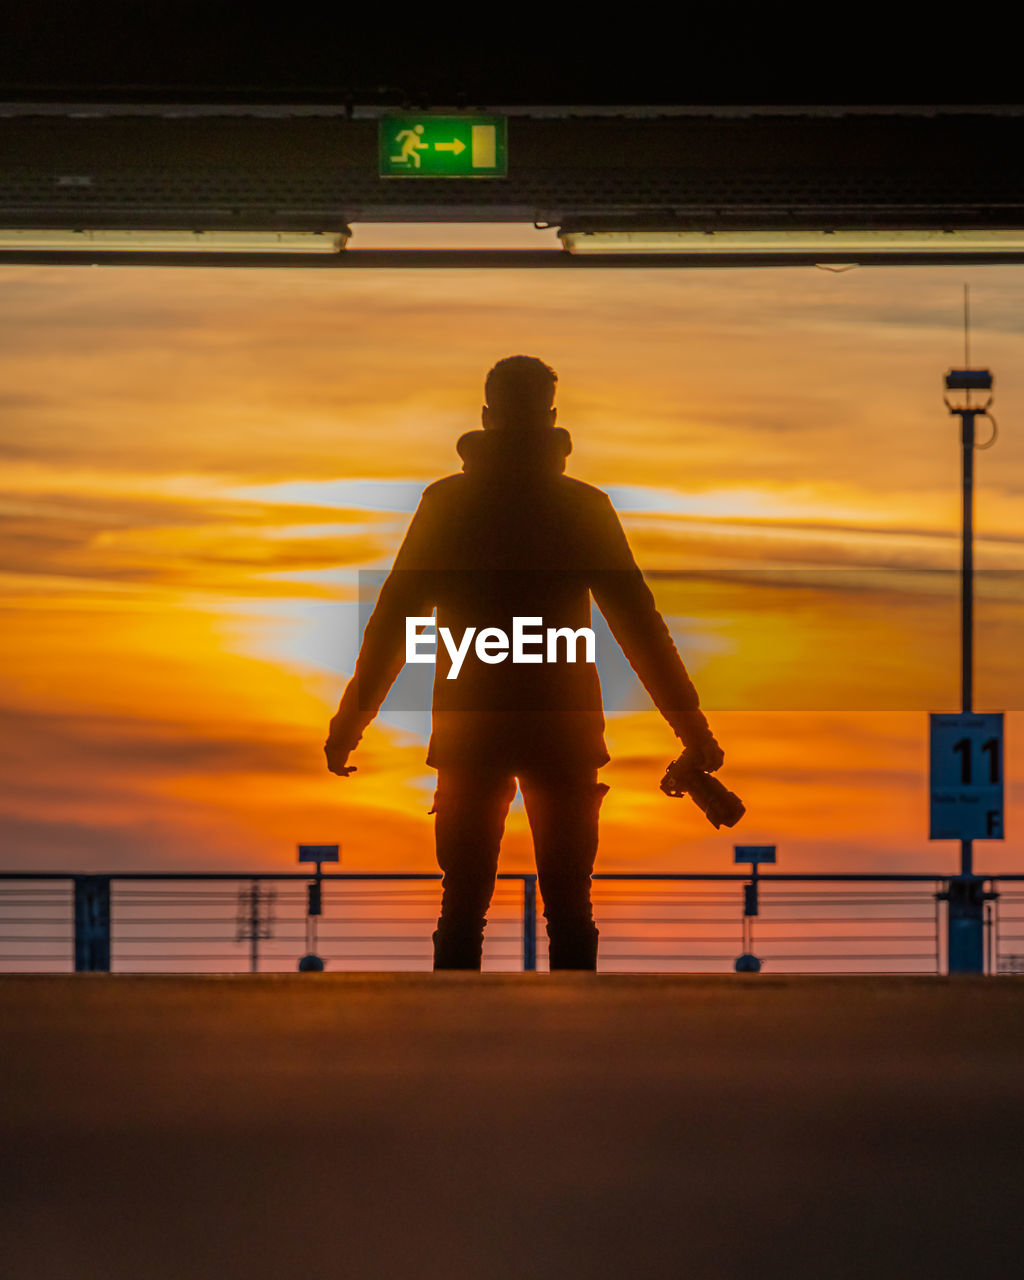 sunset, silhouette, sky, one person, evening, light, yellow, standing, nature, transportation, men, orange color, adult, reflection, person, rear view, dusk, architecture, cloud, sun, full length, lifestyles, outdoors, sign, water, backlighting, city, travel